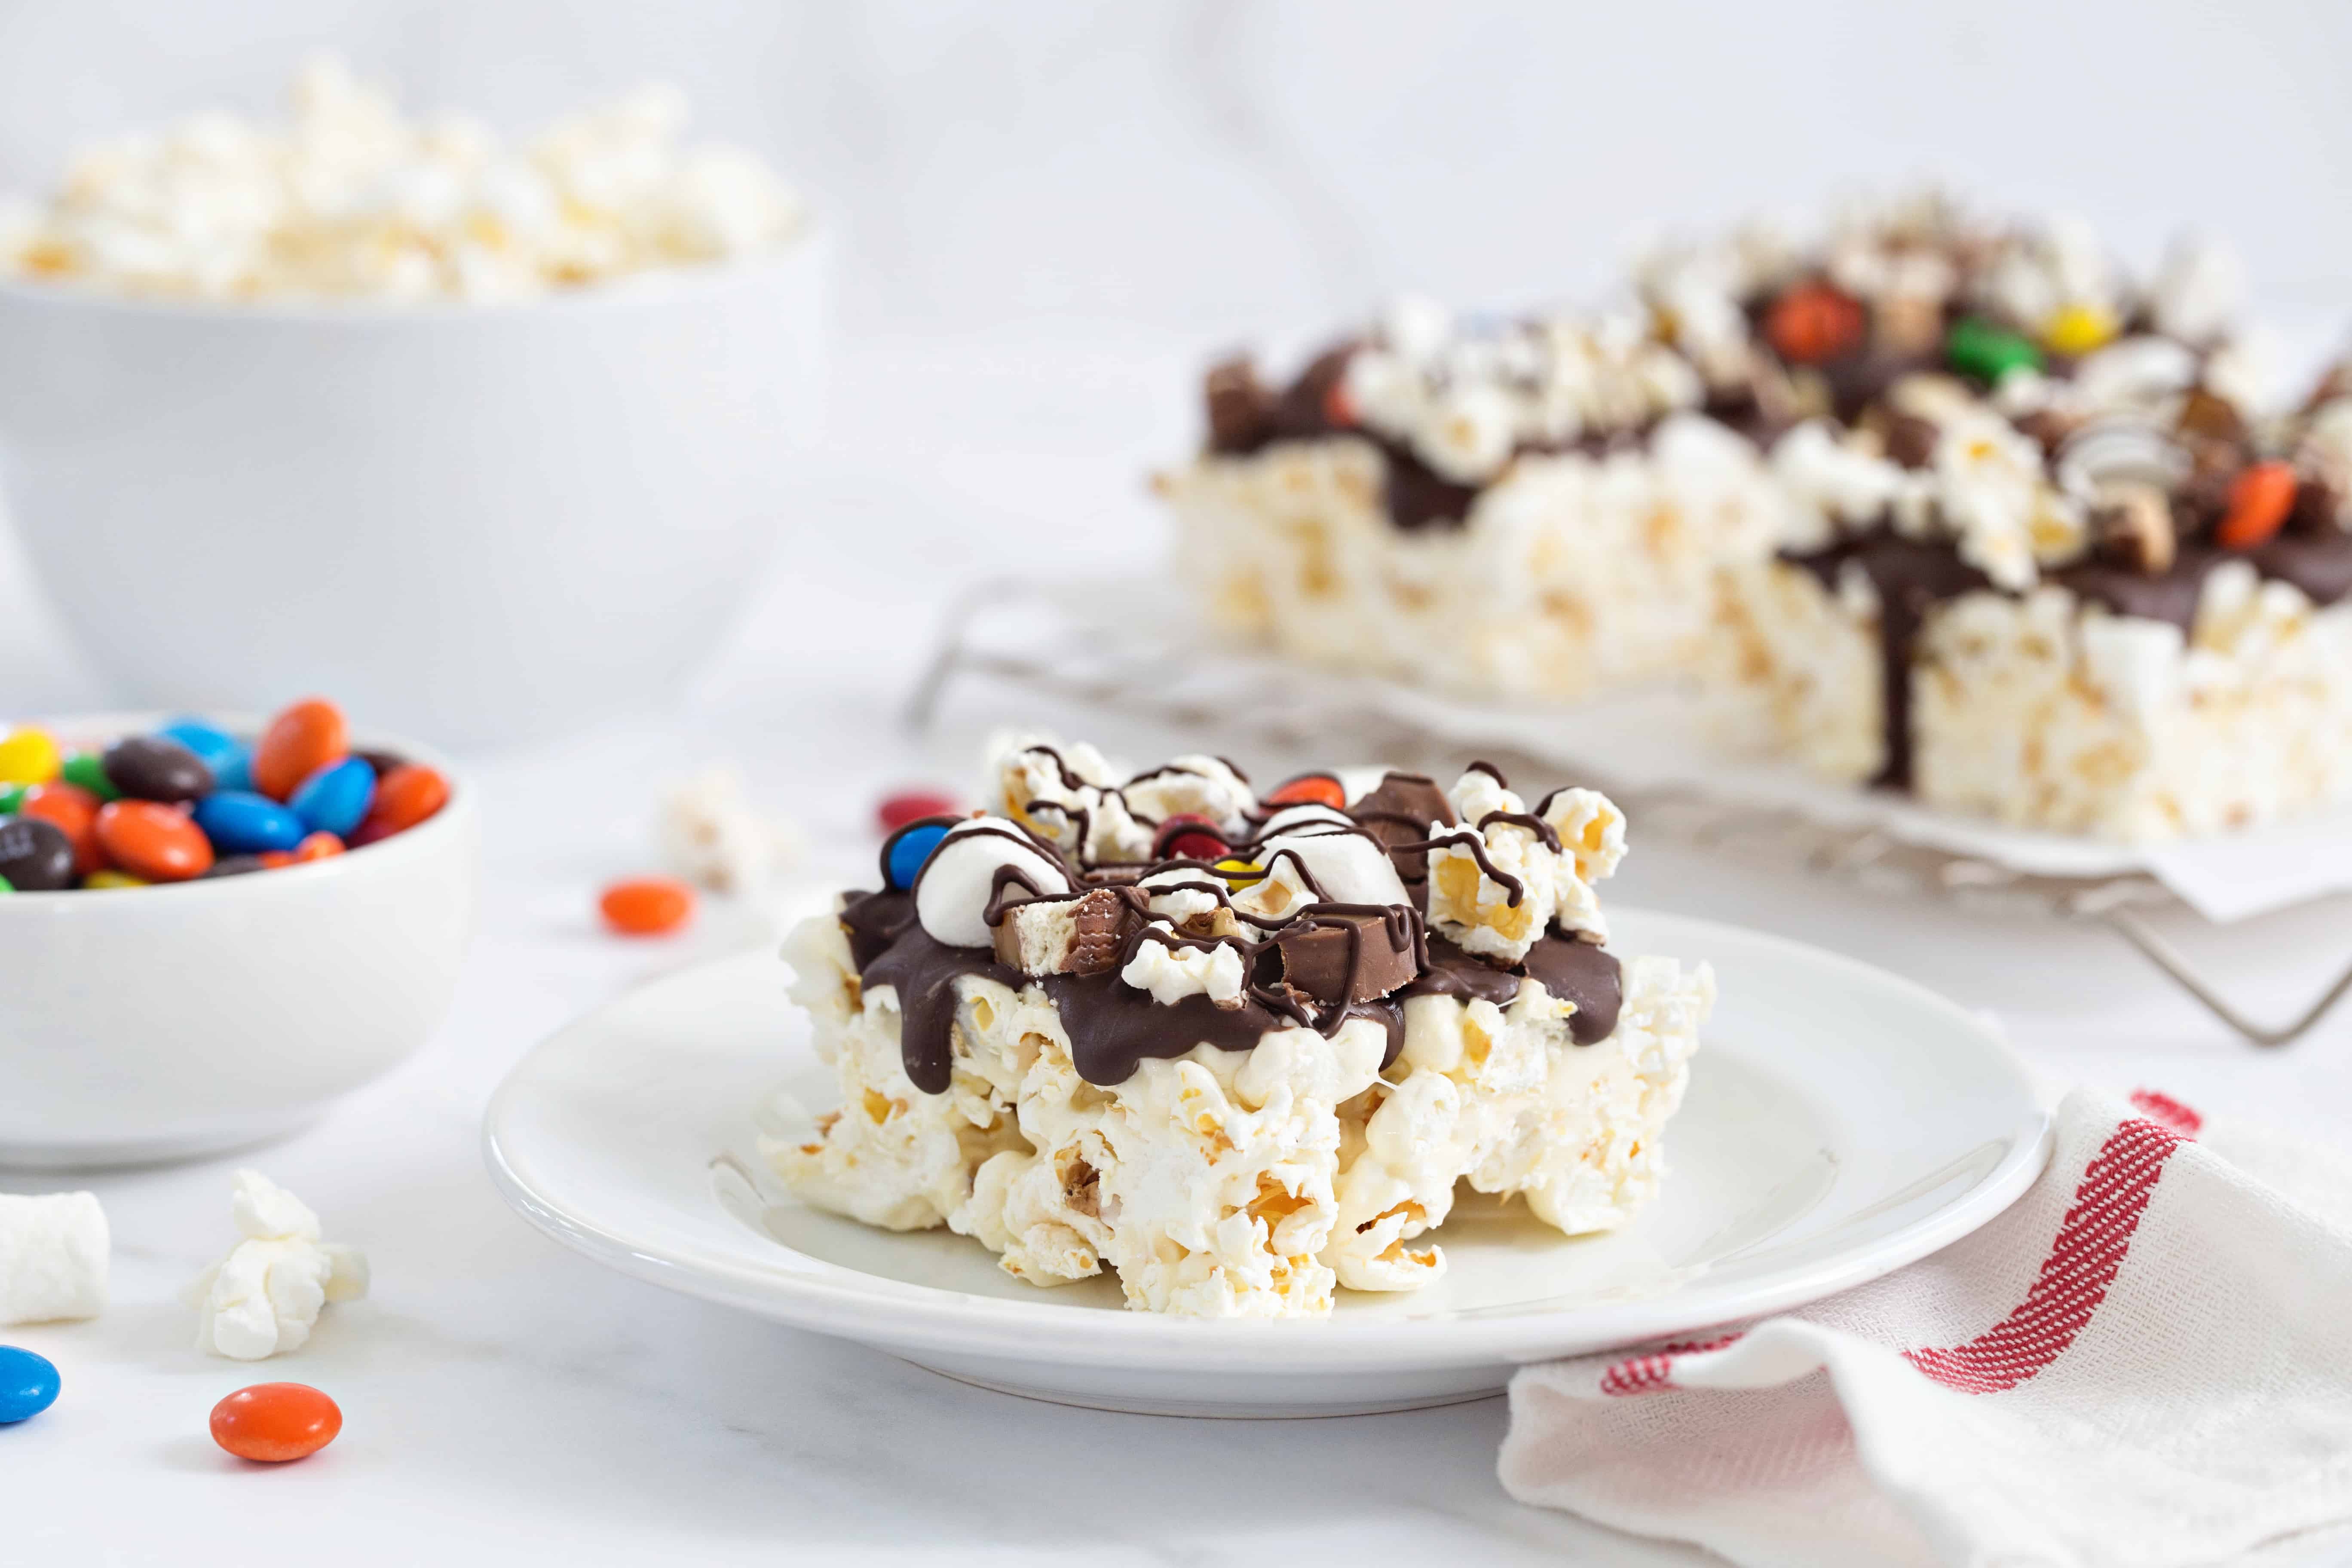 These Movie Theater Popcorn Bars are the perfect way to up your movie snack game. Top them with your favorite candy!